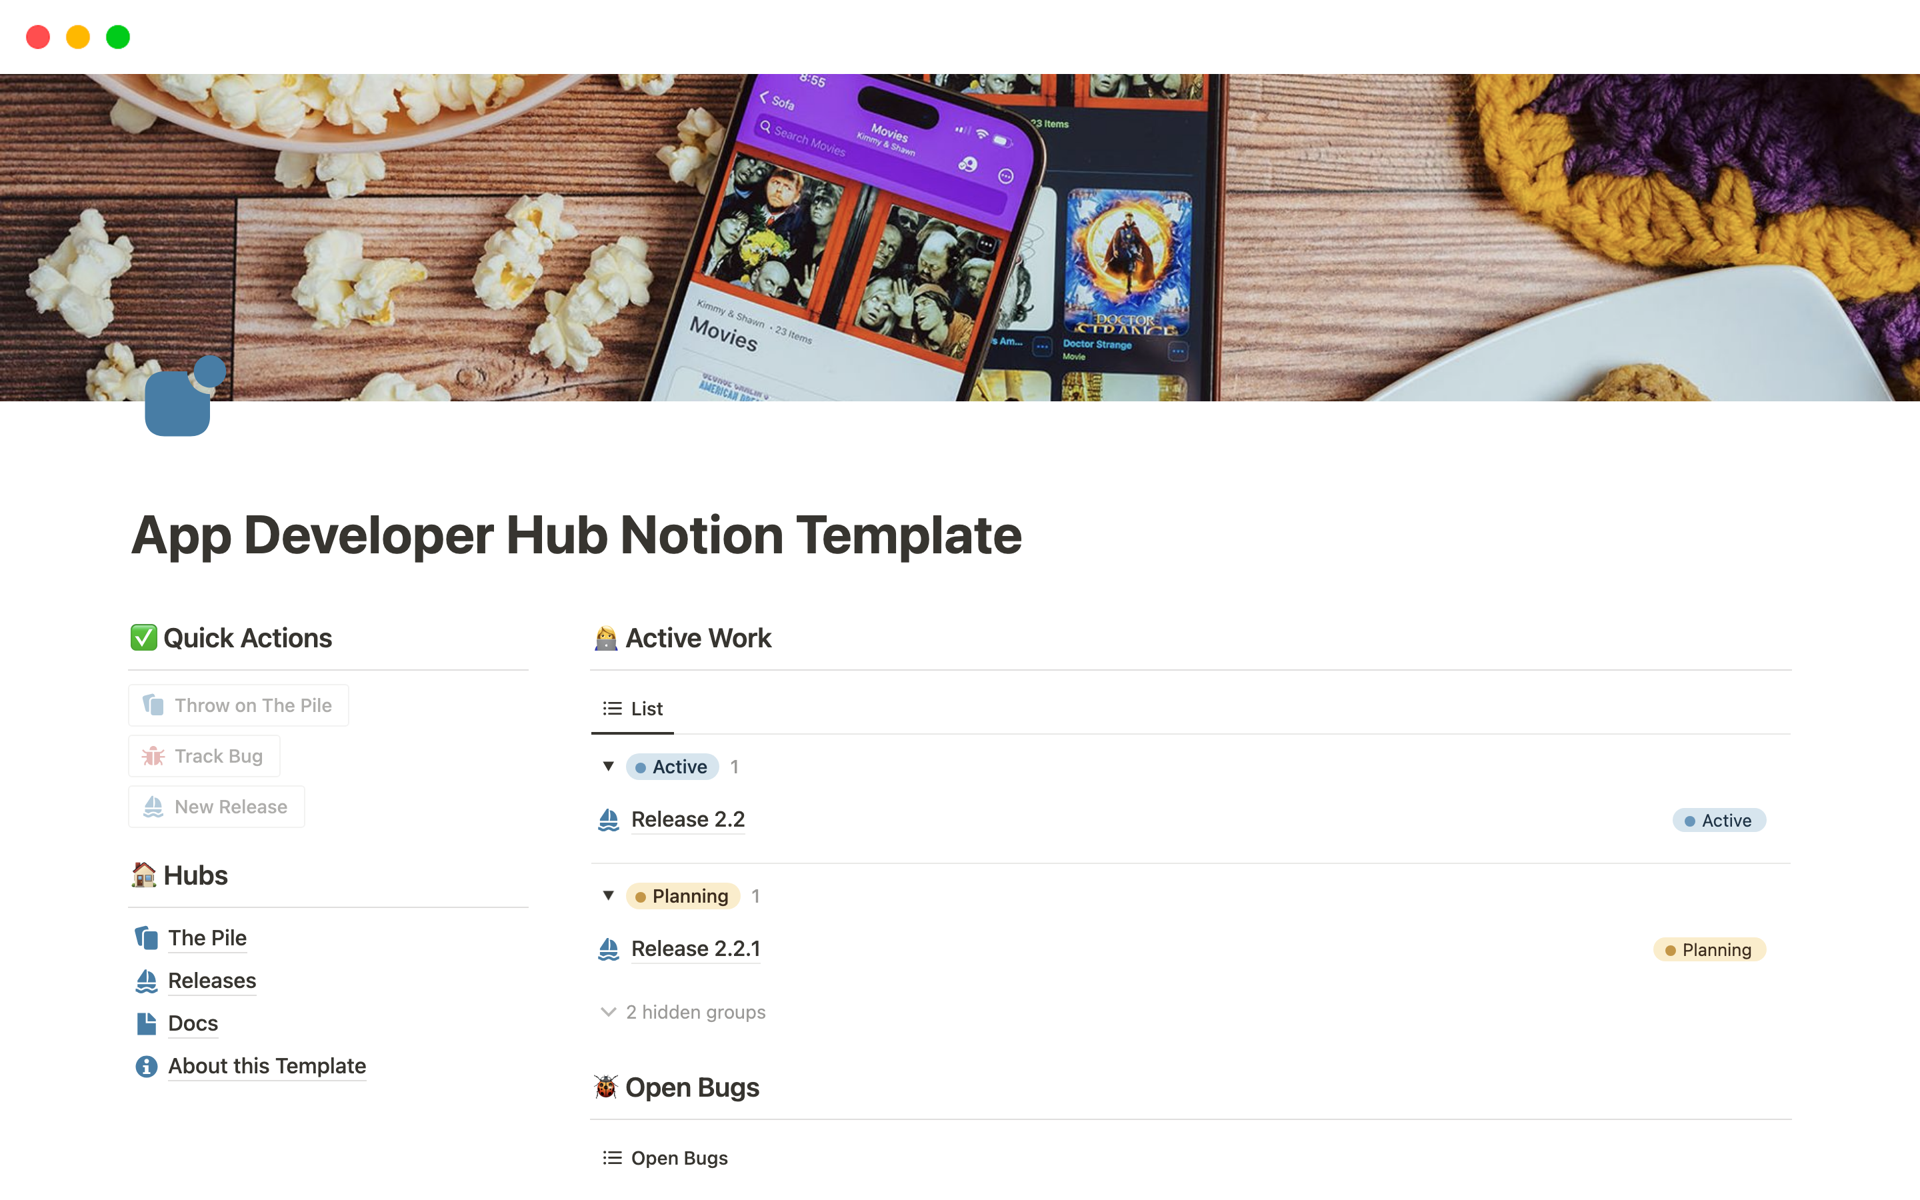 An all-in-one hub that developers can use to plan, organize, build, and ship their apps.